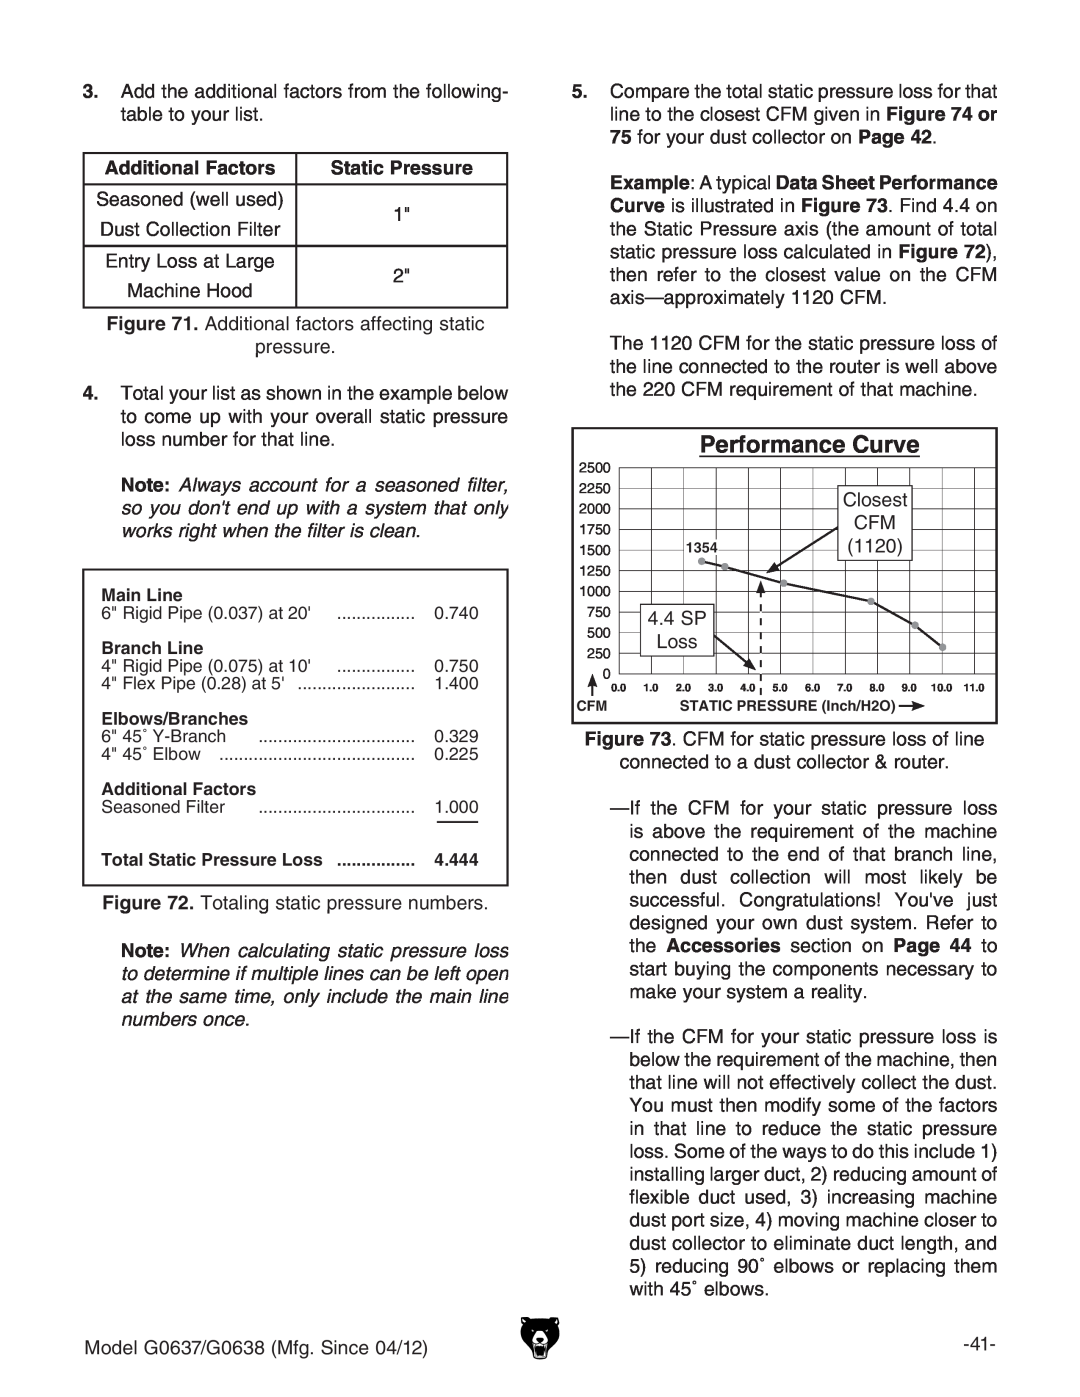 Grizzly G0637 owner manual Performance Curve, Additional Factors 